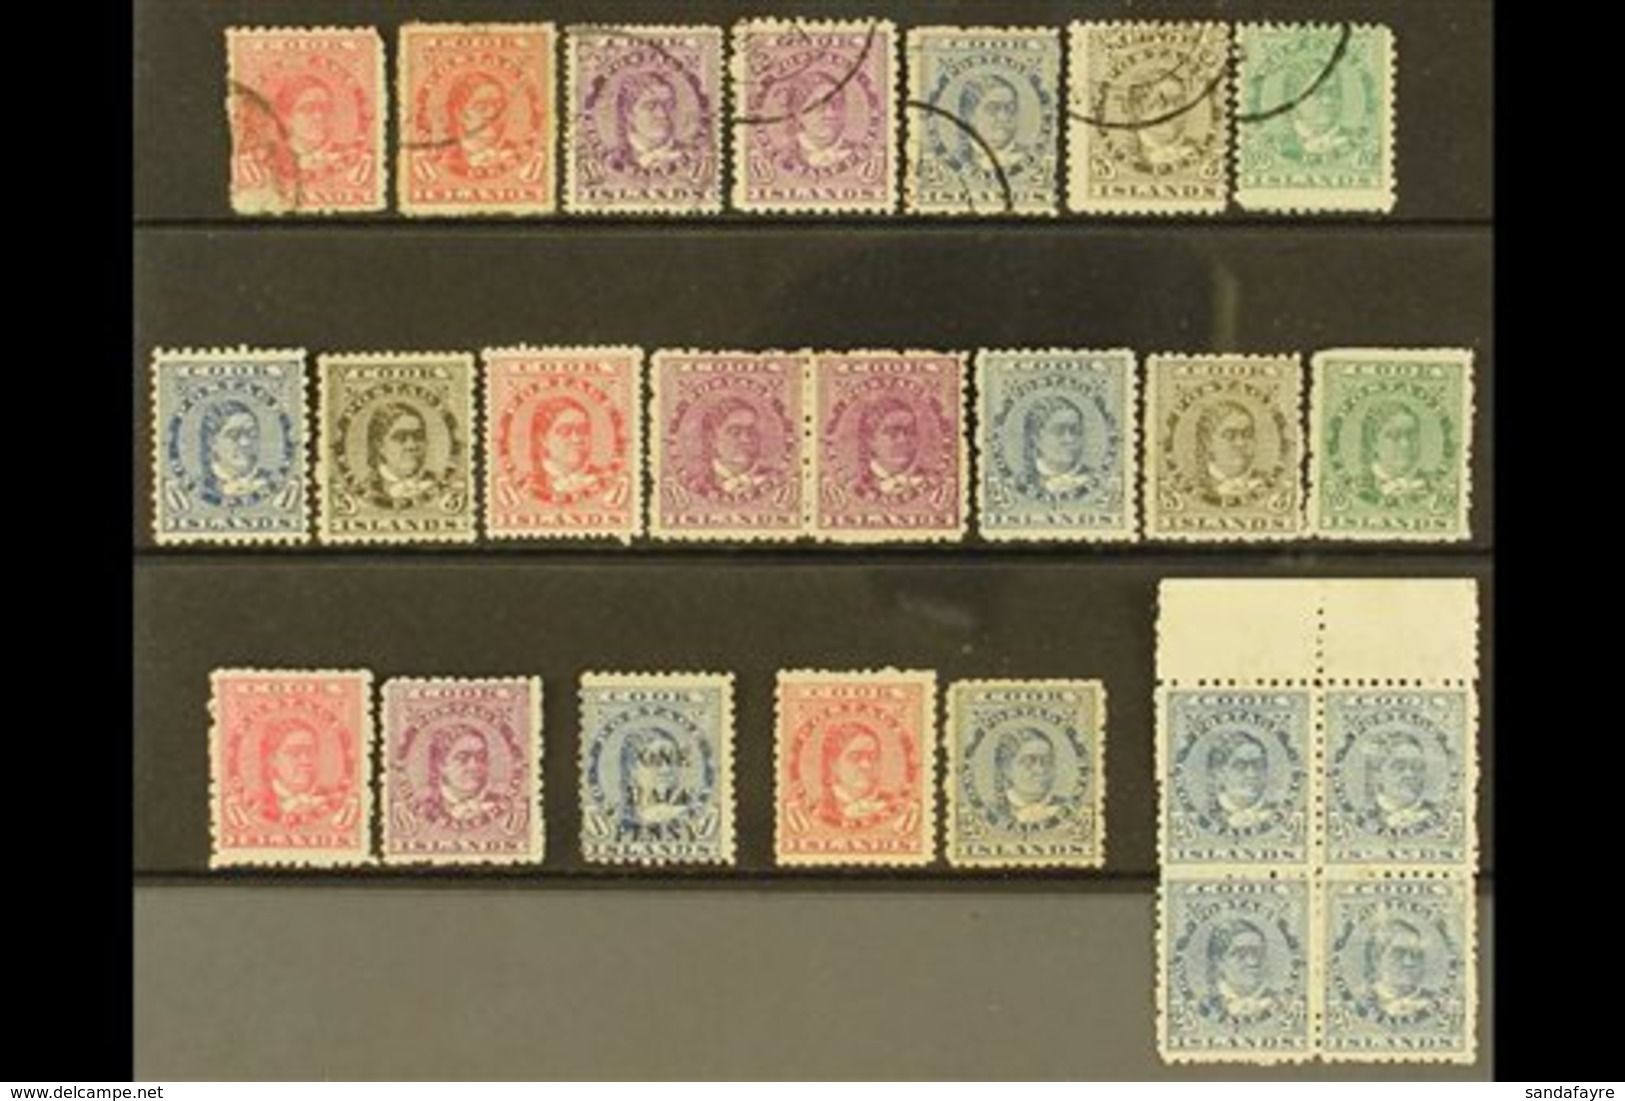 1893 - 1913 QUEEN MAKEA TAKAU ISSUES  1893 Vals To 5d Olive, Perf 11 Vals To 10d Used, 1899 ½d On 1d Blue, 1902 No Wmk O - Cook Islands